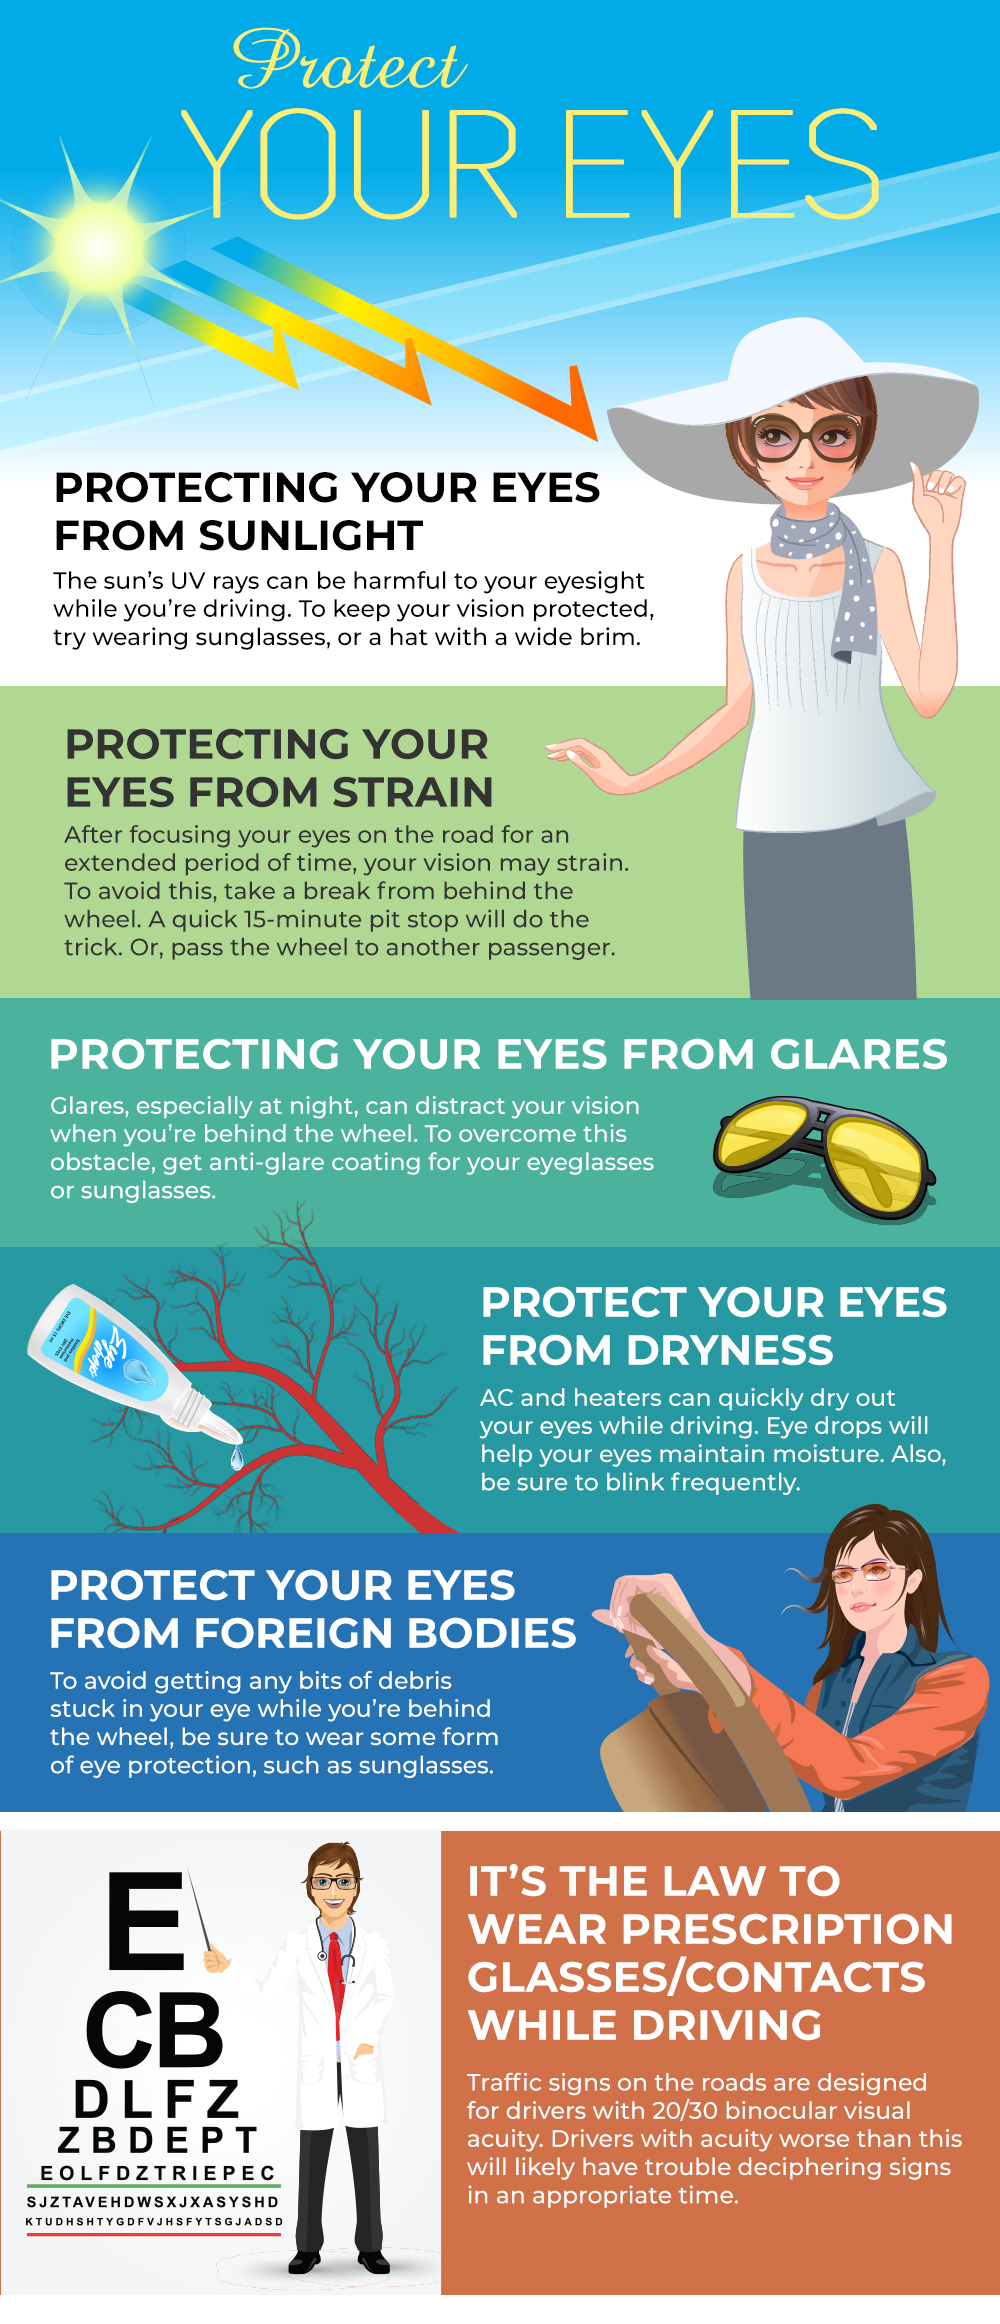 Protect your eyes from the sun's UV rays > MacDill Air Force Base >  Commentaries